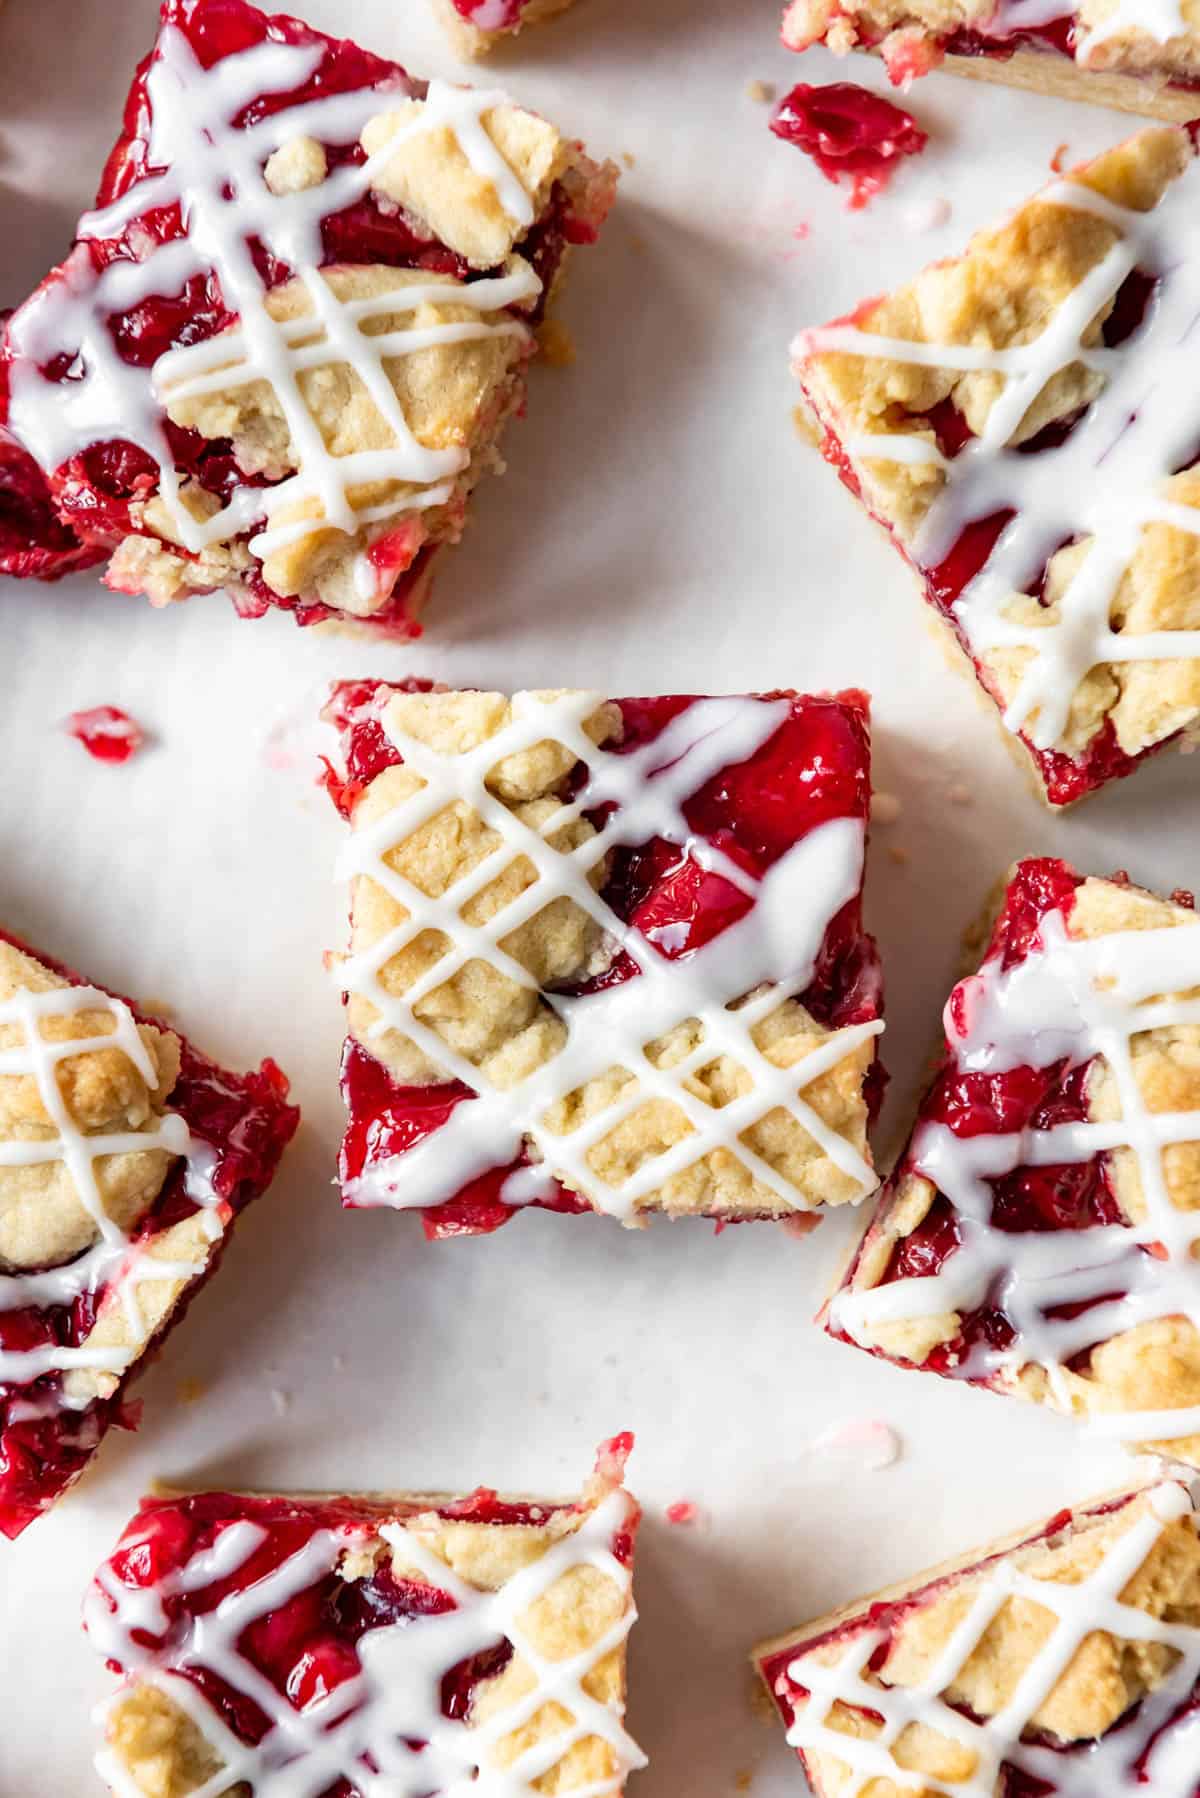 An overhead image of a square cherry dessert bar with homemade cherry pie filling.